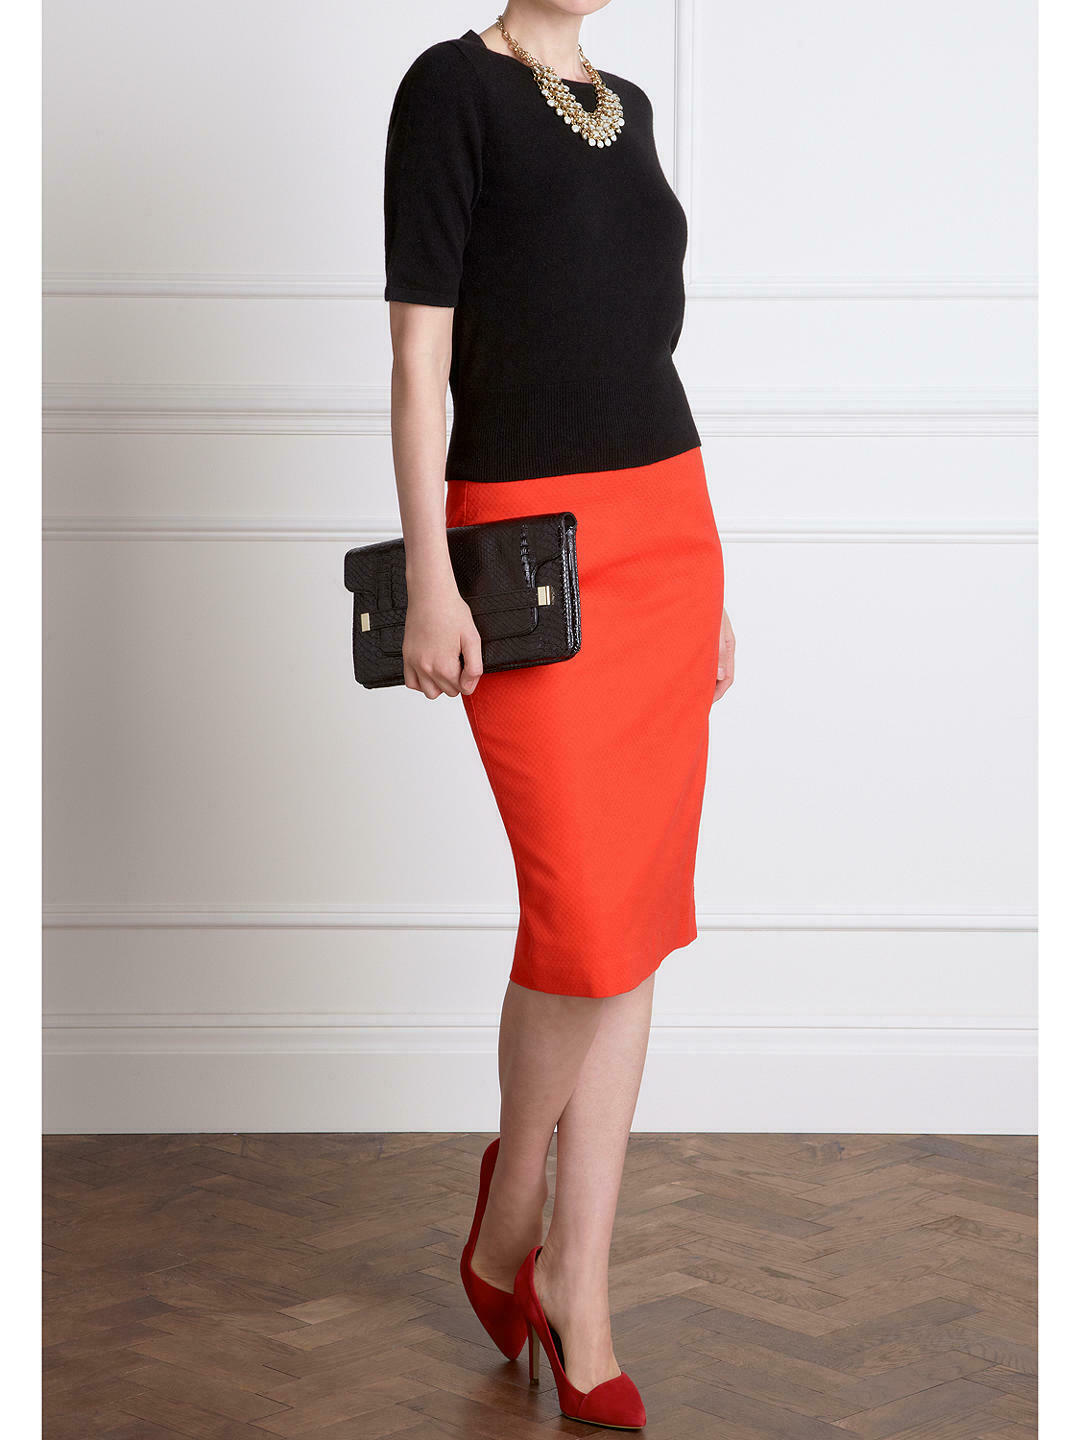 Pure Collection Tomato Red Belford Pencil Skirt UK 20 US 16 EU 48 BNWT RRP £70 Timeless Fashions